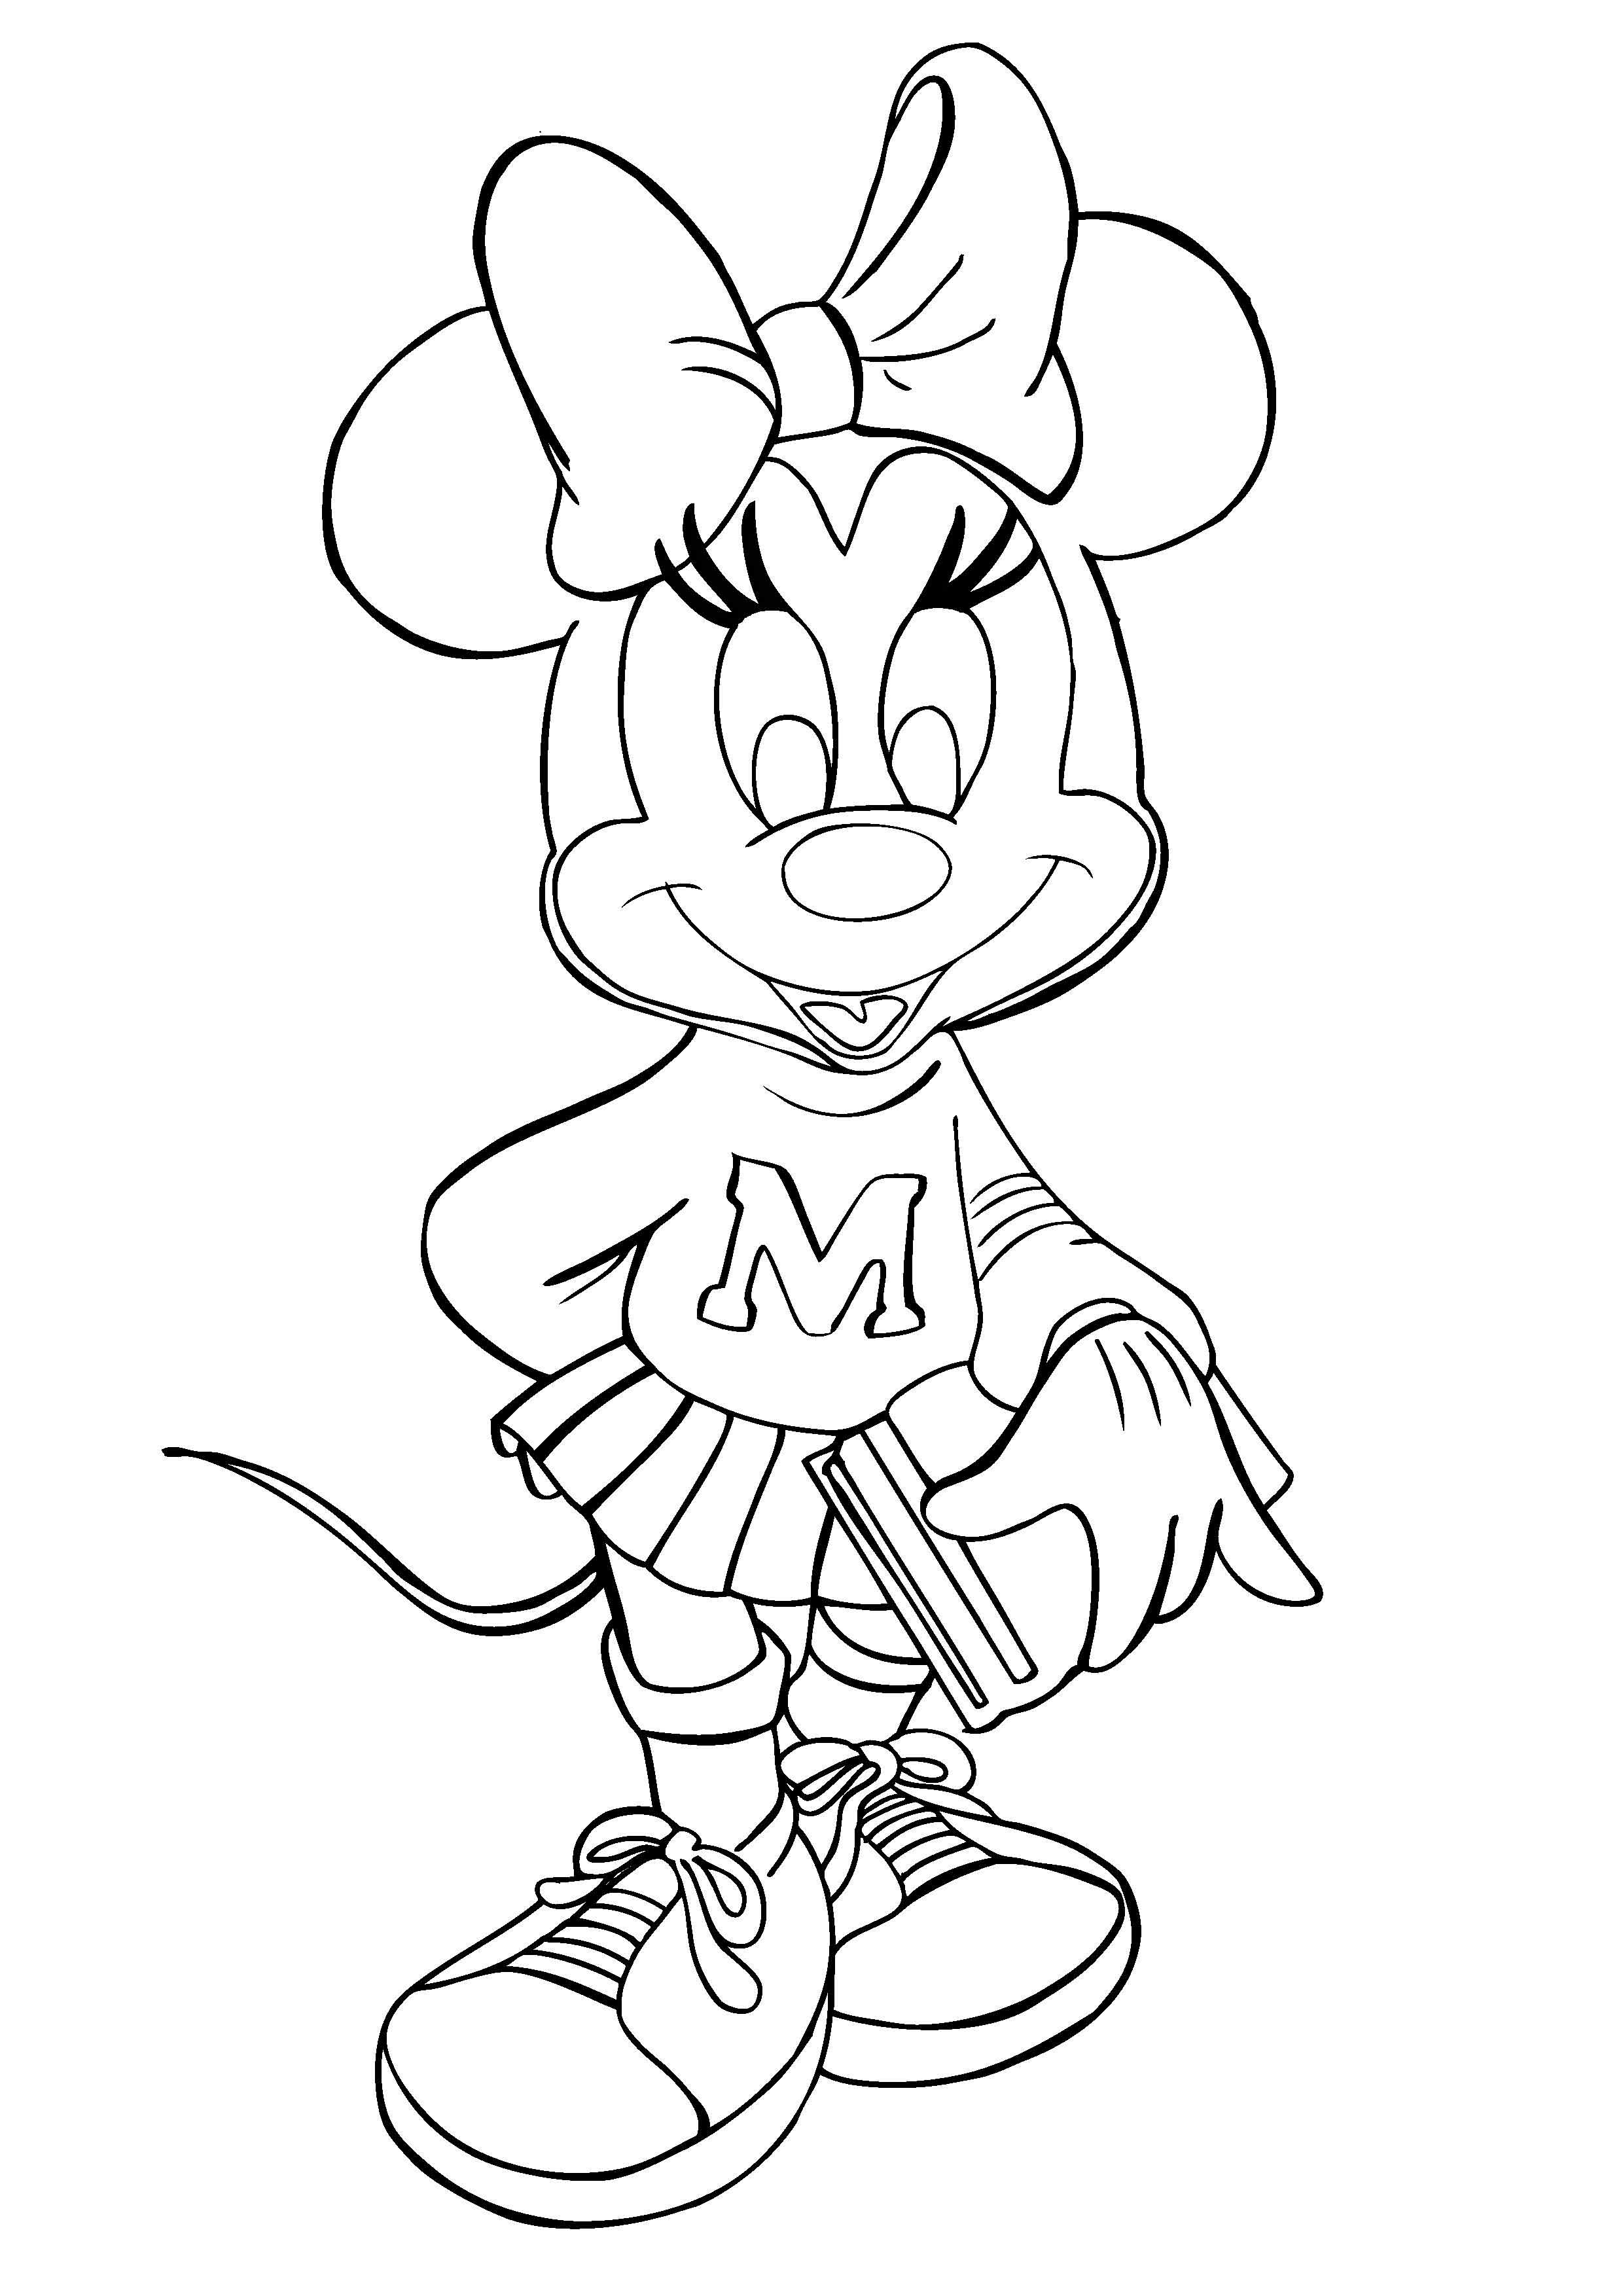 Free Minnie Mouse Face Coloring Pages Download Free Minnie Mouse Face